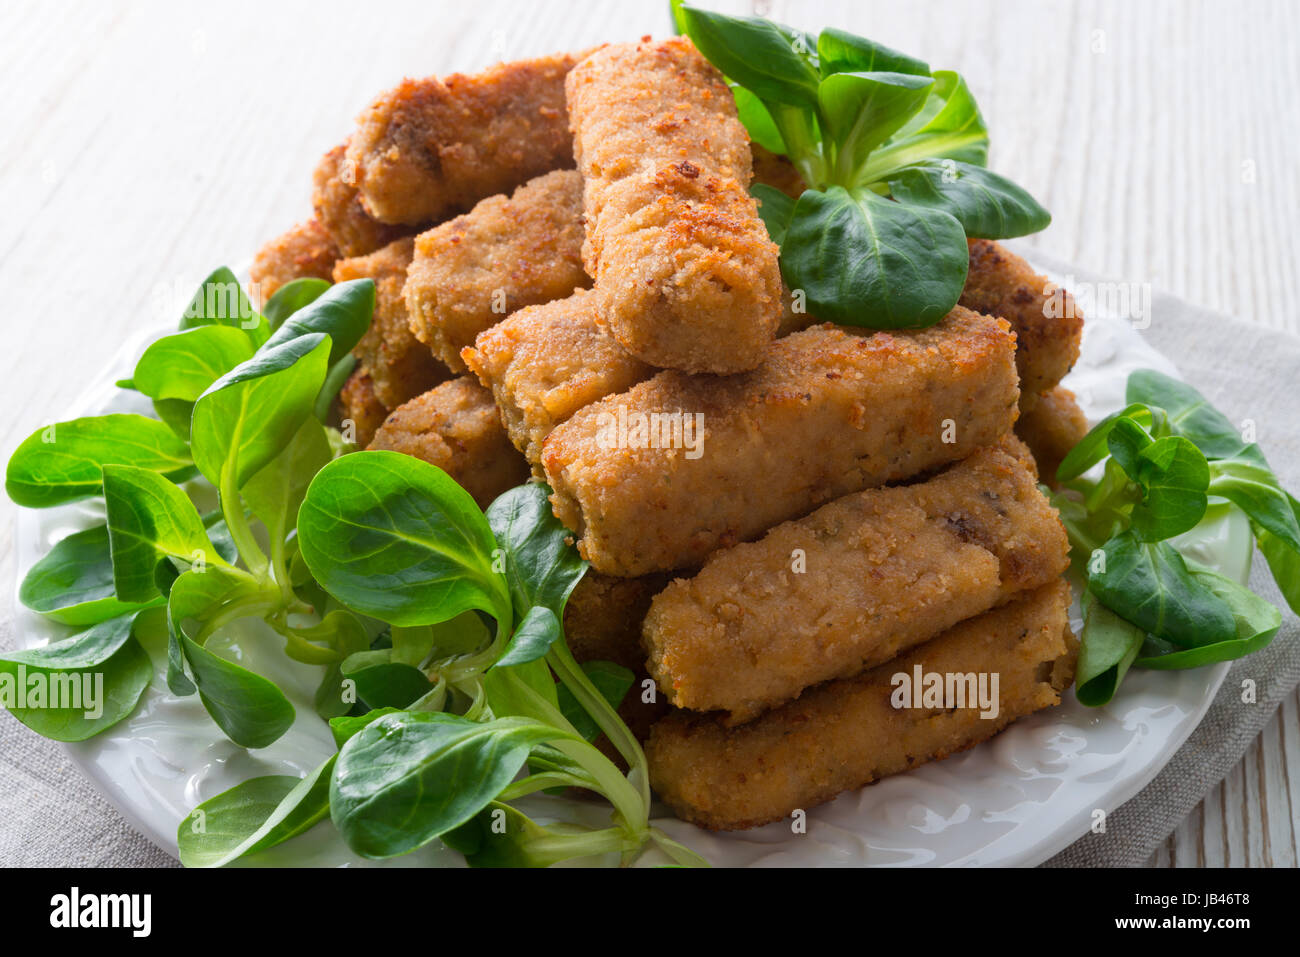 home-baked fish sticks with salad Stock Photo